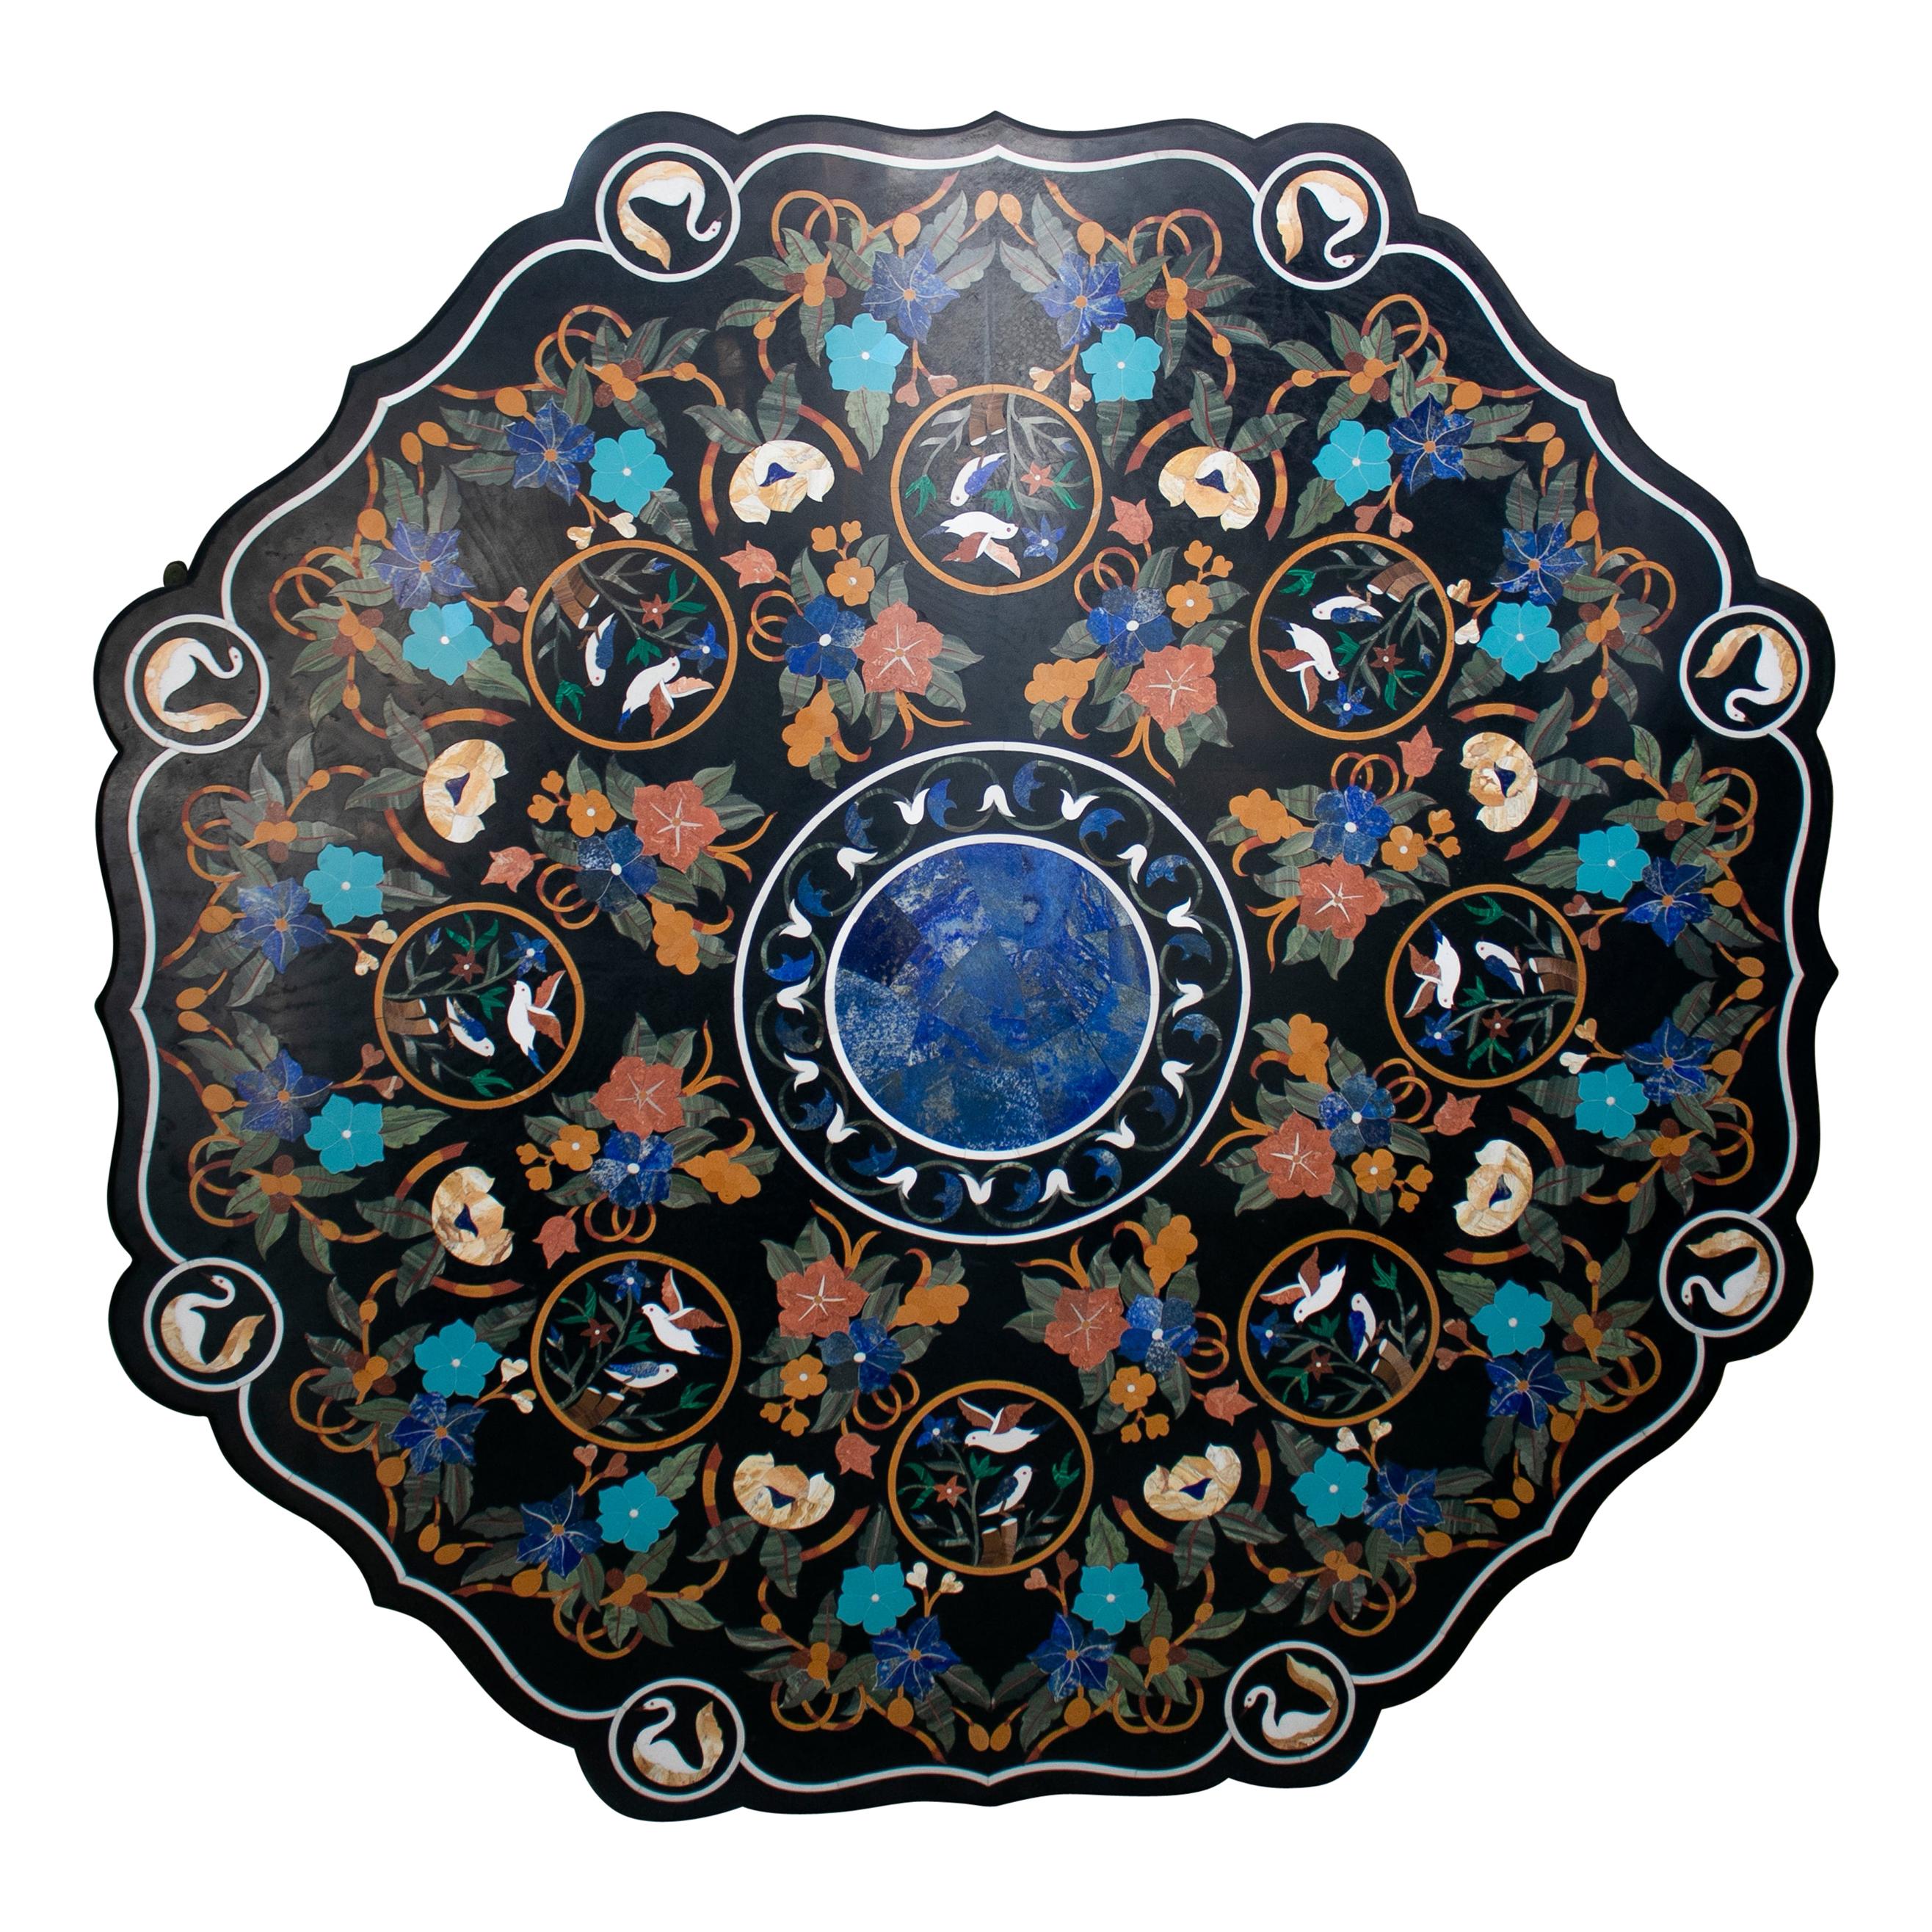 Octagonal Pietre Dure Marble Inlay Mosaic Table Top with Lapis and Turquoise 